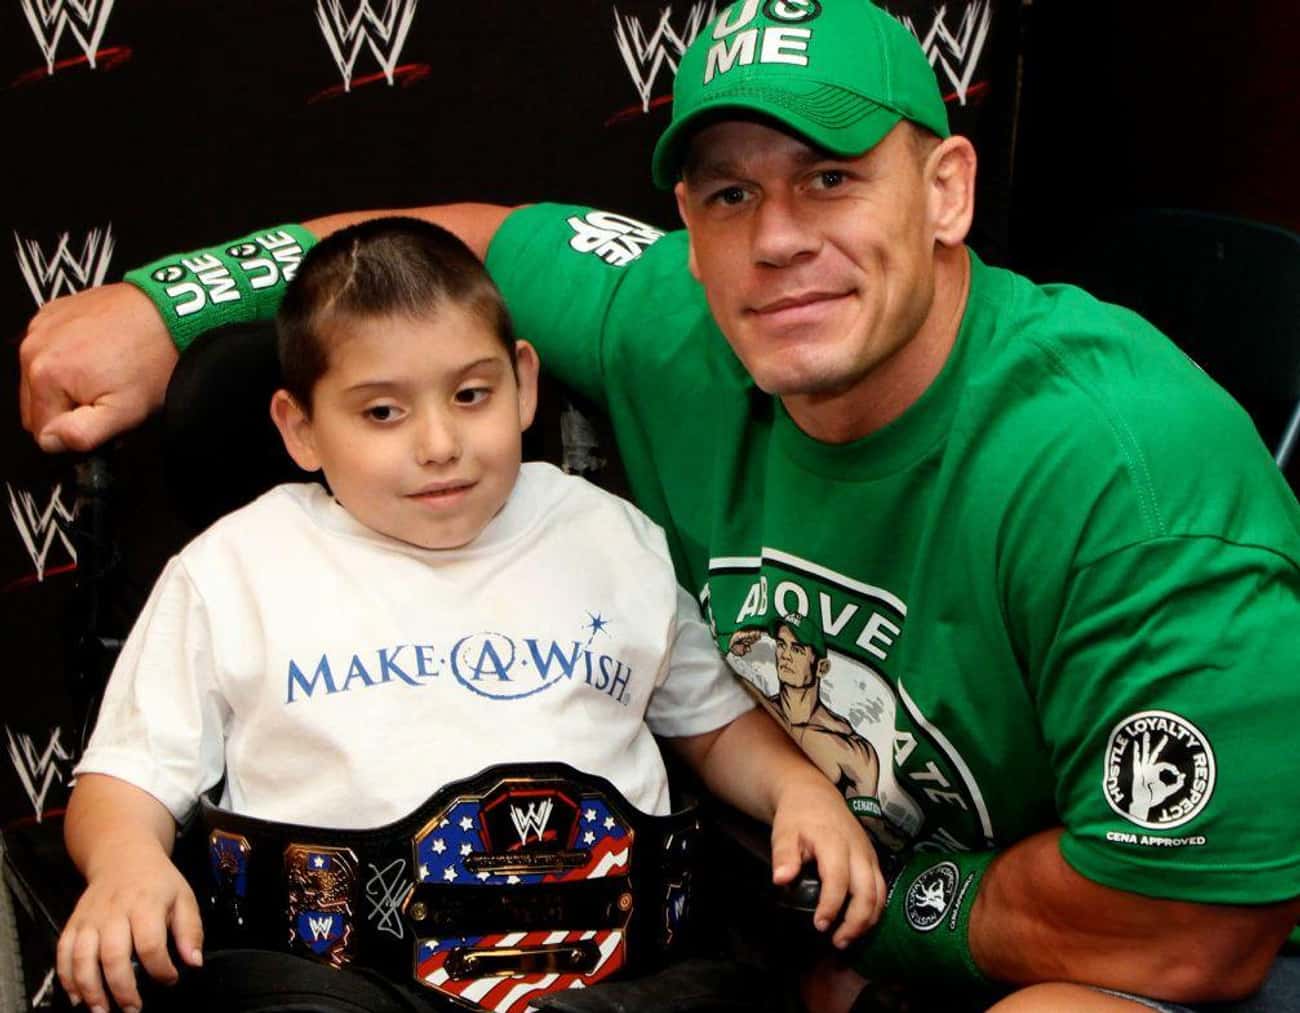 He Holds The Record For Most Wishes For The Make-A-Wish Foundation